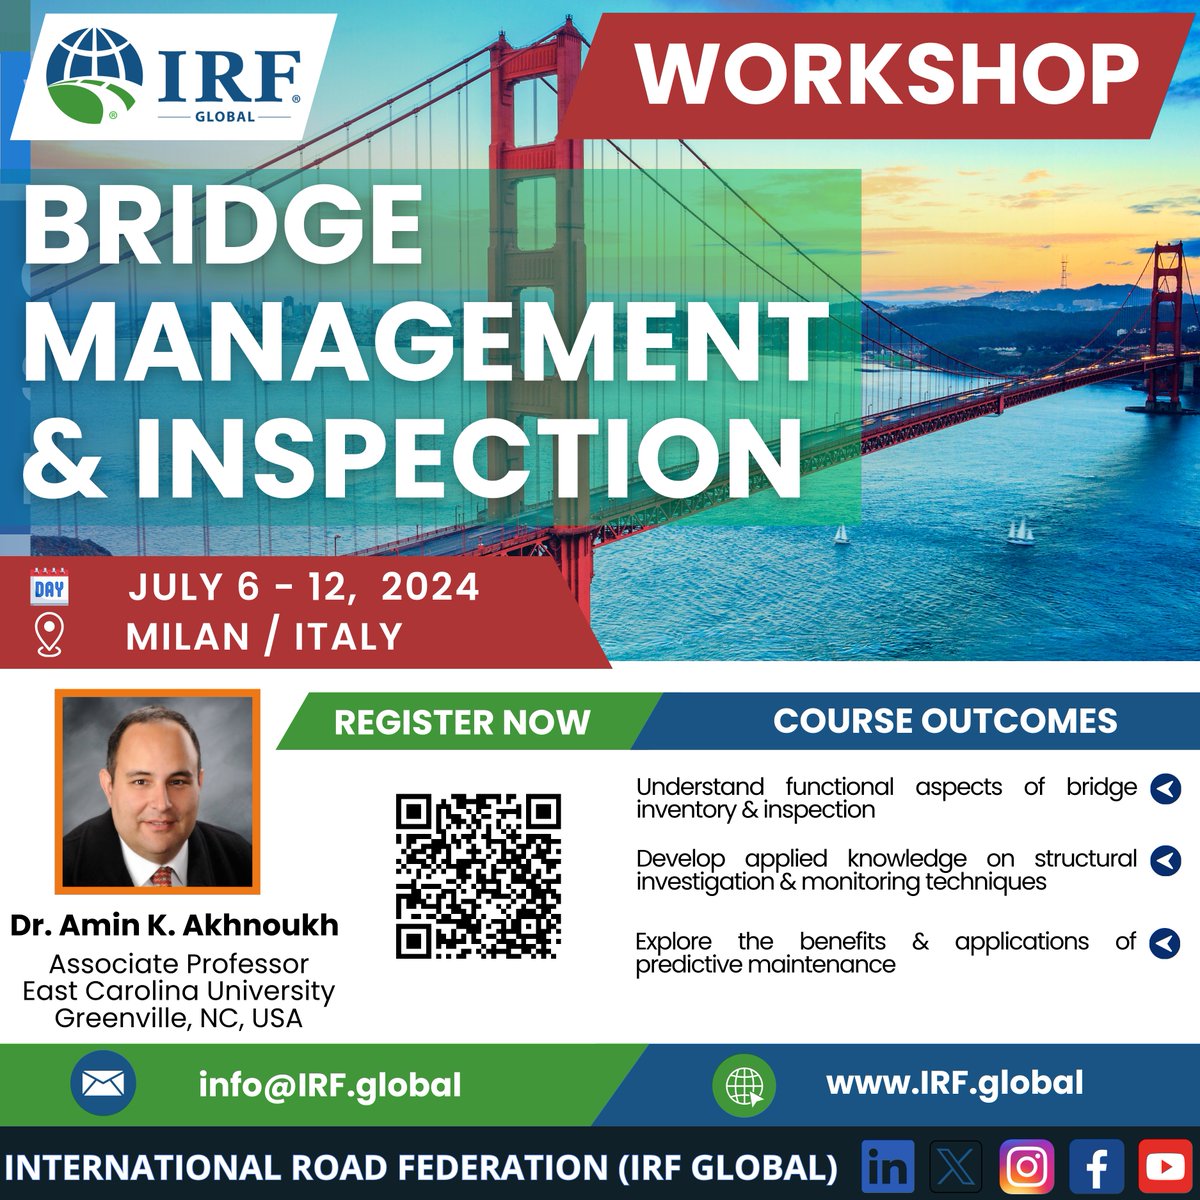 🌉Bridge Management & Inspection Workshop by the International Road Federation (IRF Global) on July 6-12,2024 in #Milan, Italy.
Read more & Register now at: t.ly/e34Wj
#IRFglobal #bridgeinspection #maintenancemanagement #bridgedesign #structuralengineering #bridge